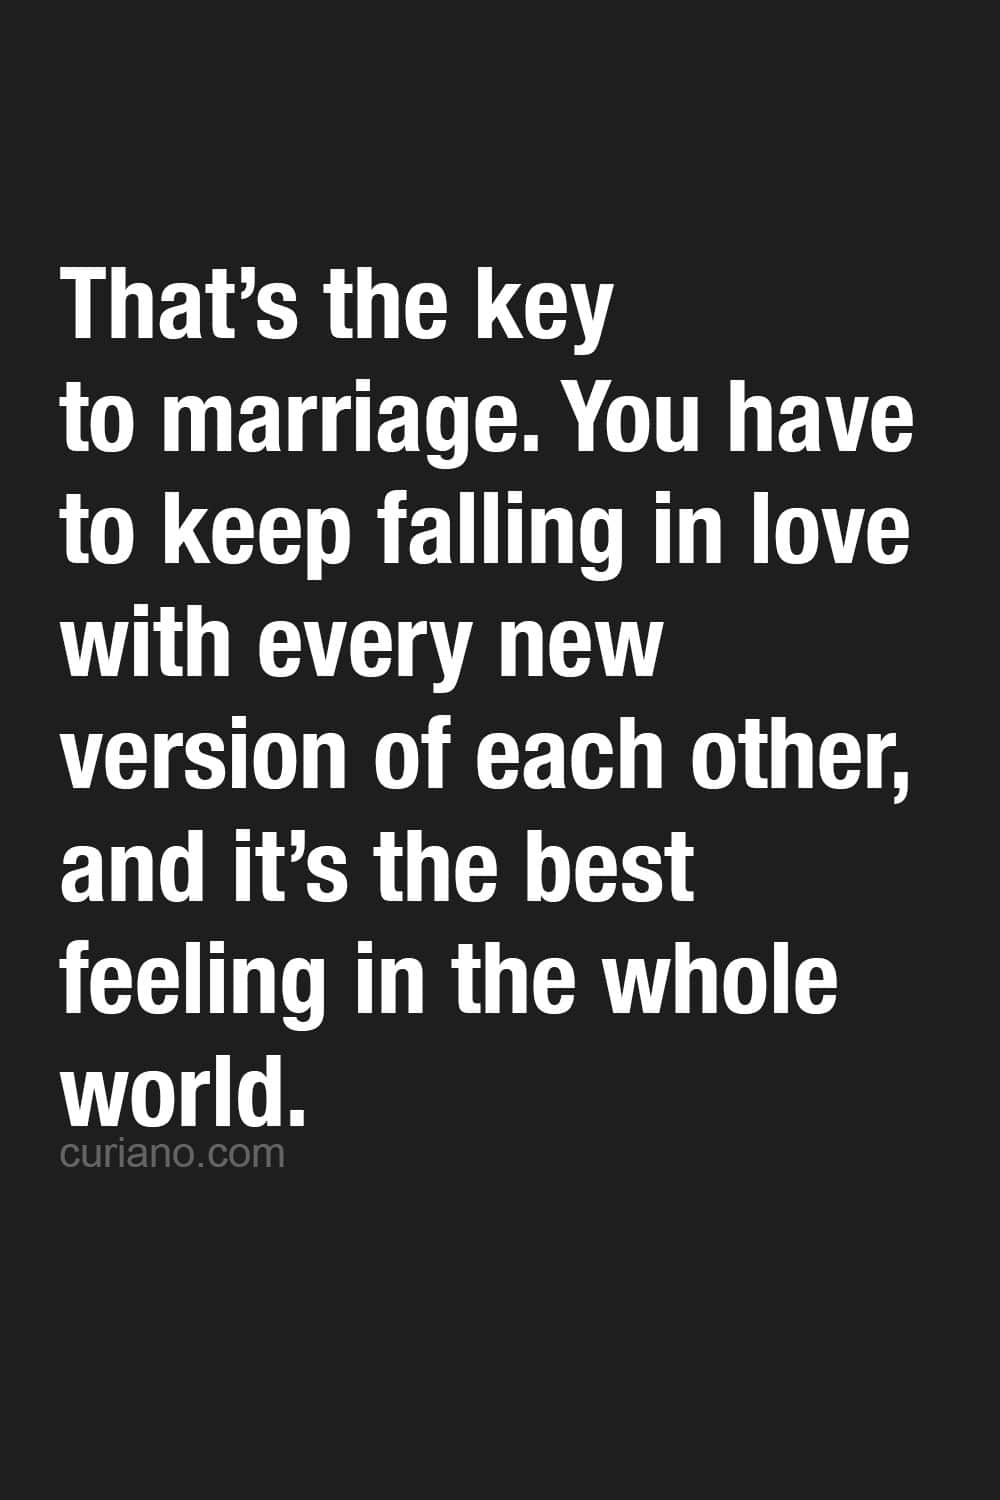 That’s the key to marriage. You have to keep falling in love with every new version of each other, and it’s the best feeling in the whole world.